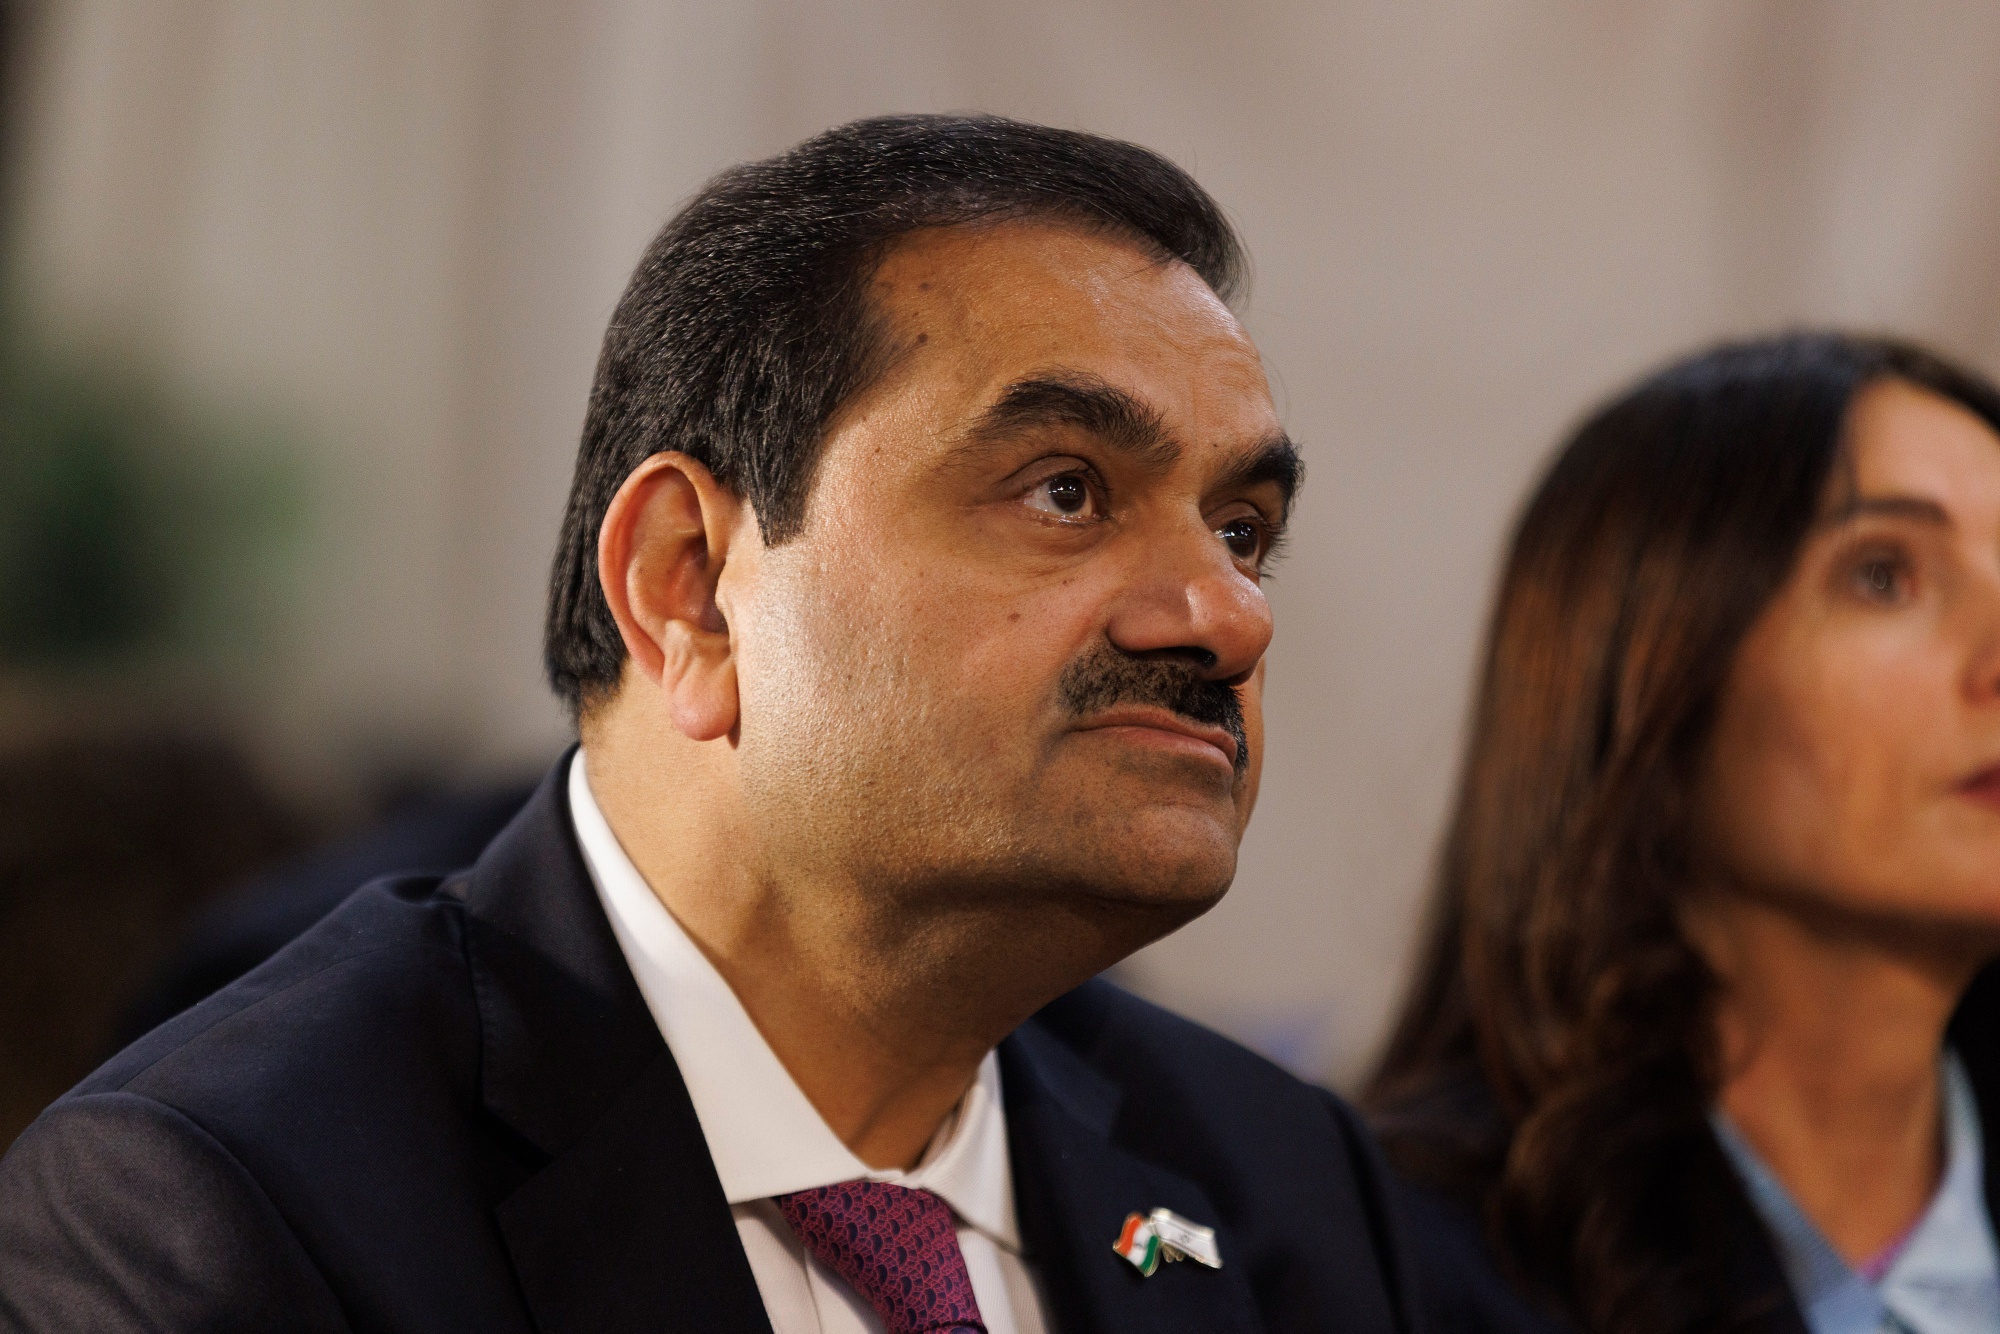 As Modi Falters, Adani Reaches Out to India's Opposition Leaders - Adani  Watch